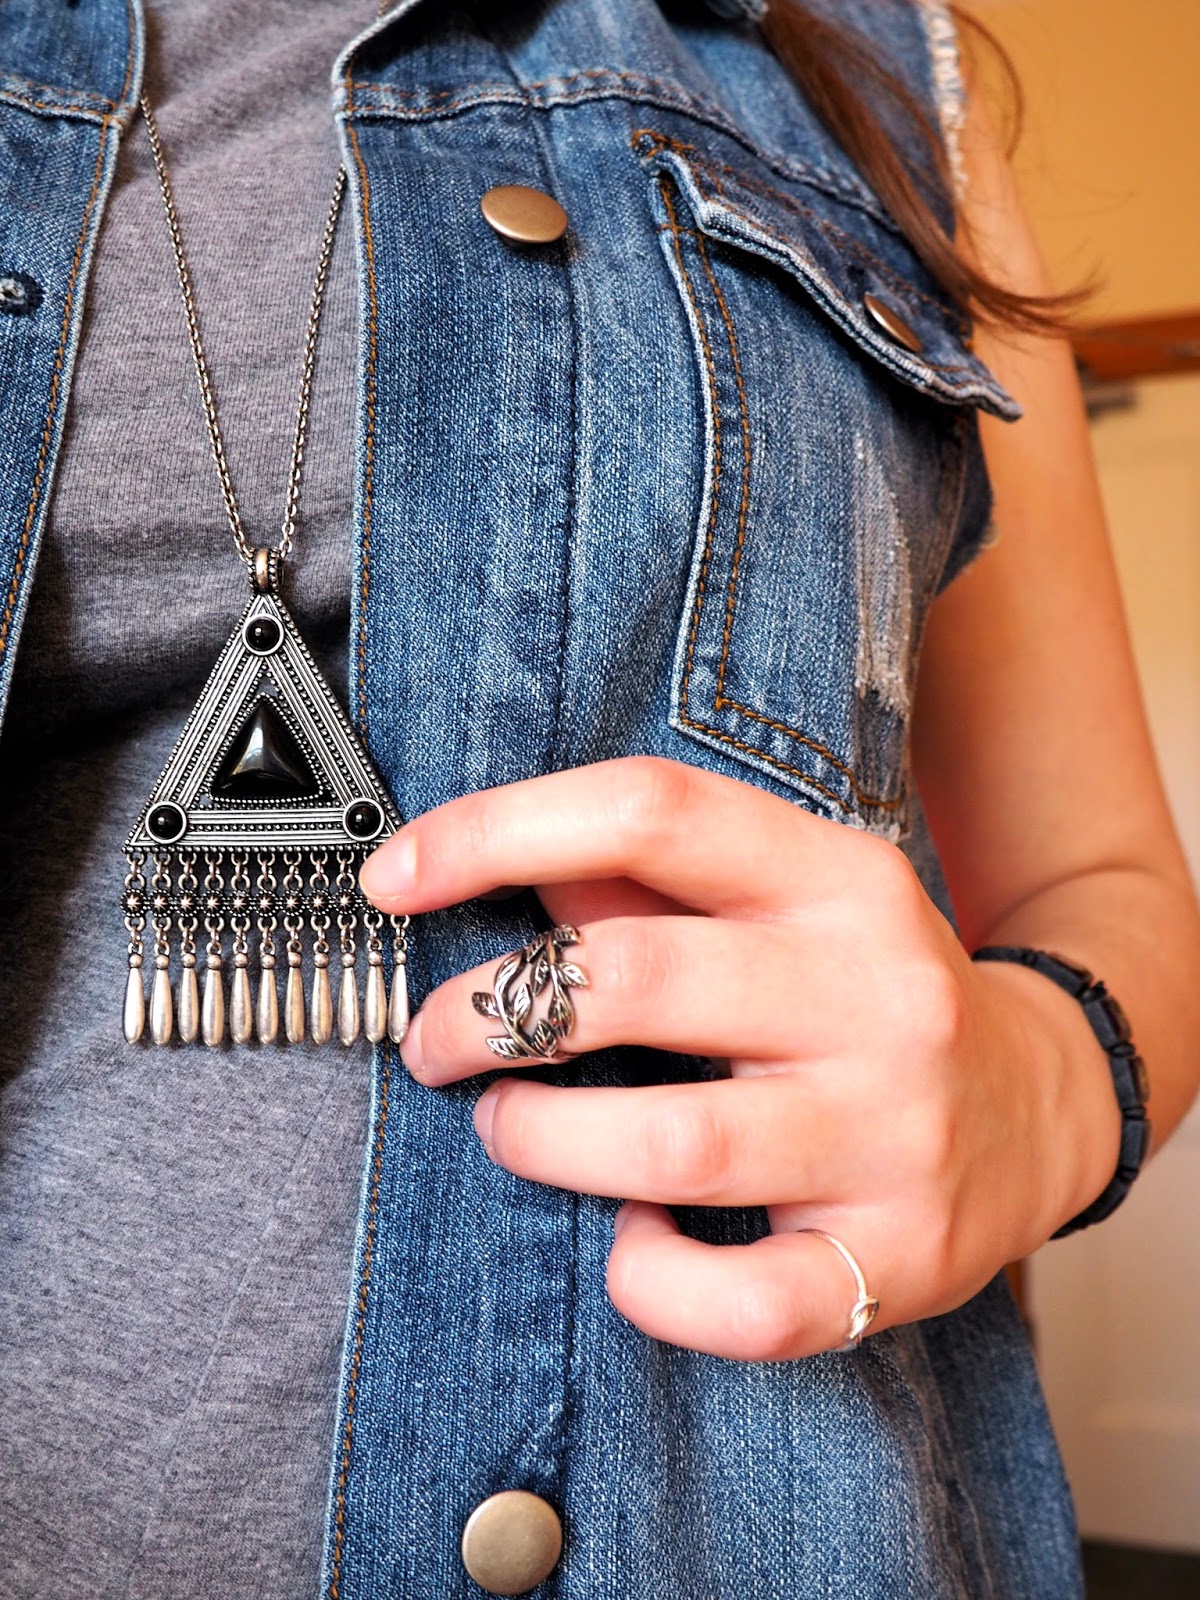 Distressed Denim outfit jewellery details | black and silver triangle pendant necklace, silver leaf midi ring, silver knot ring